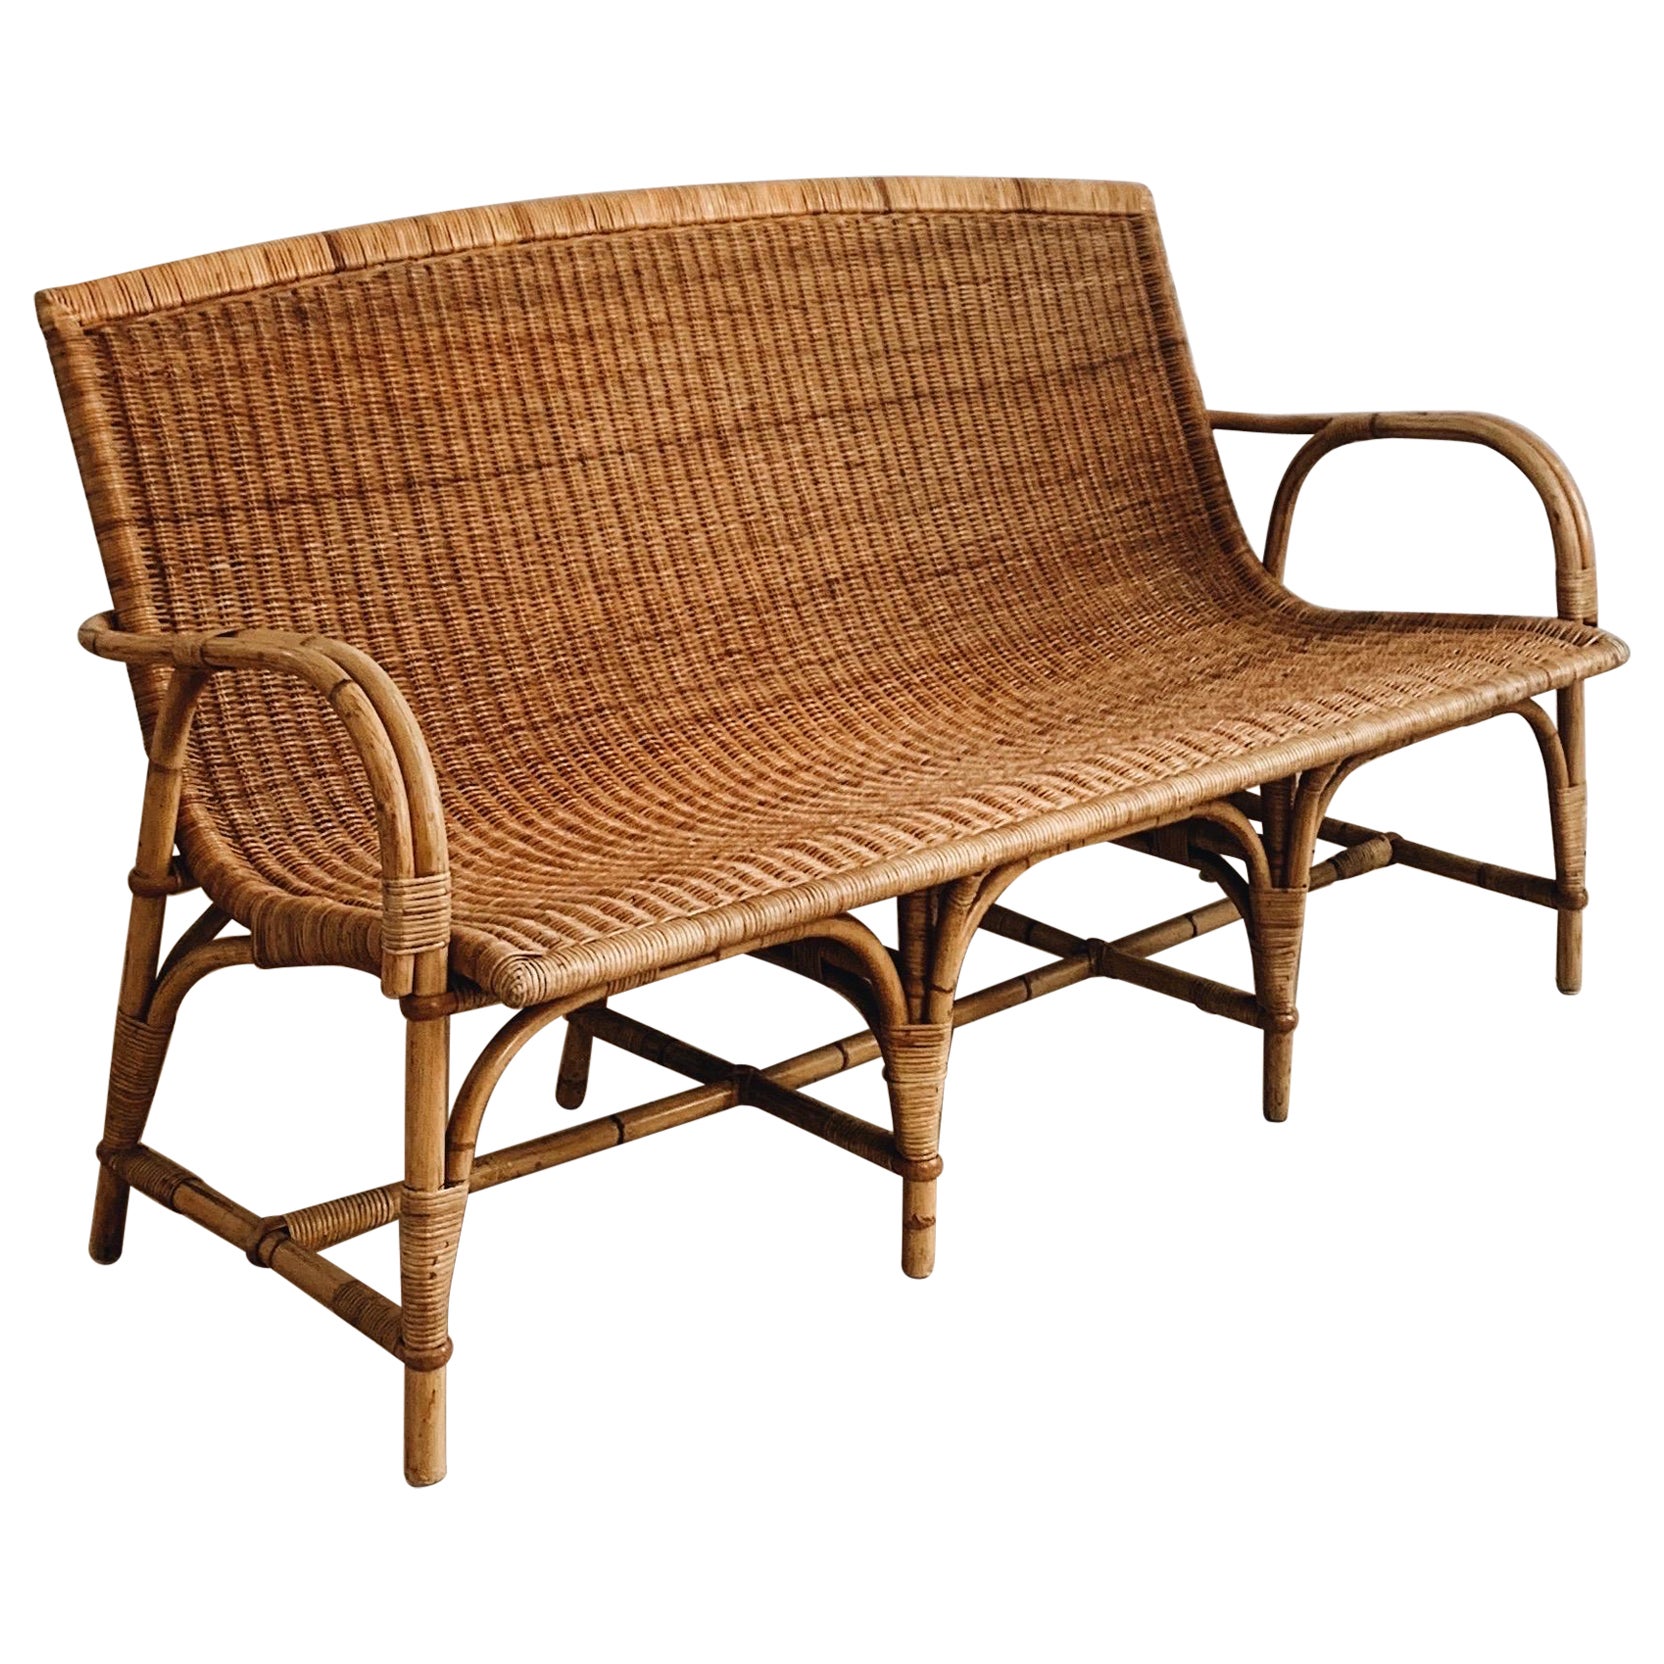 Danish wicker bench from the 1940’s - attributed Robert Wengler.   For Sale